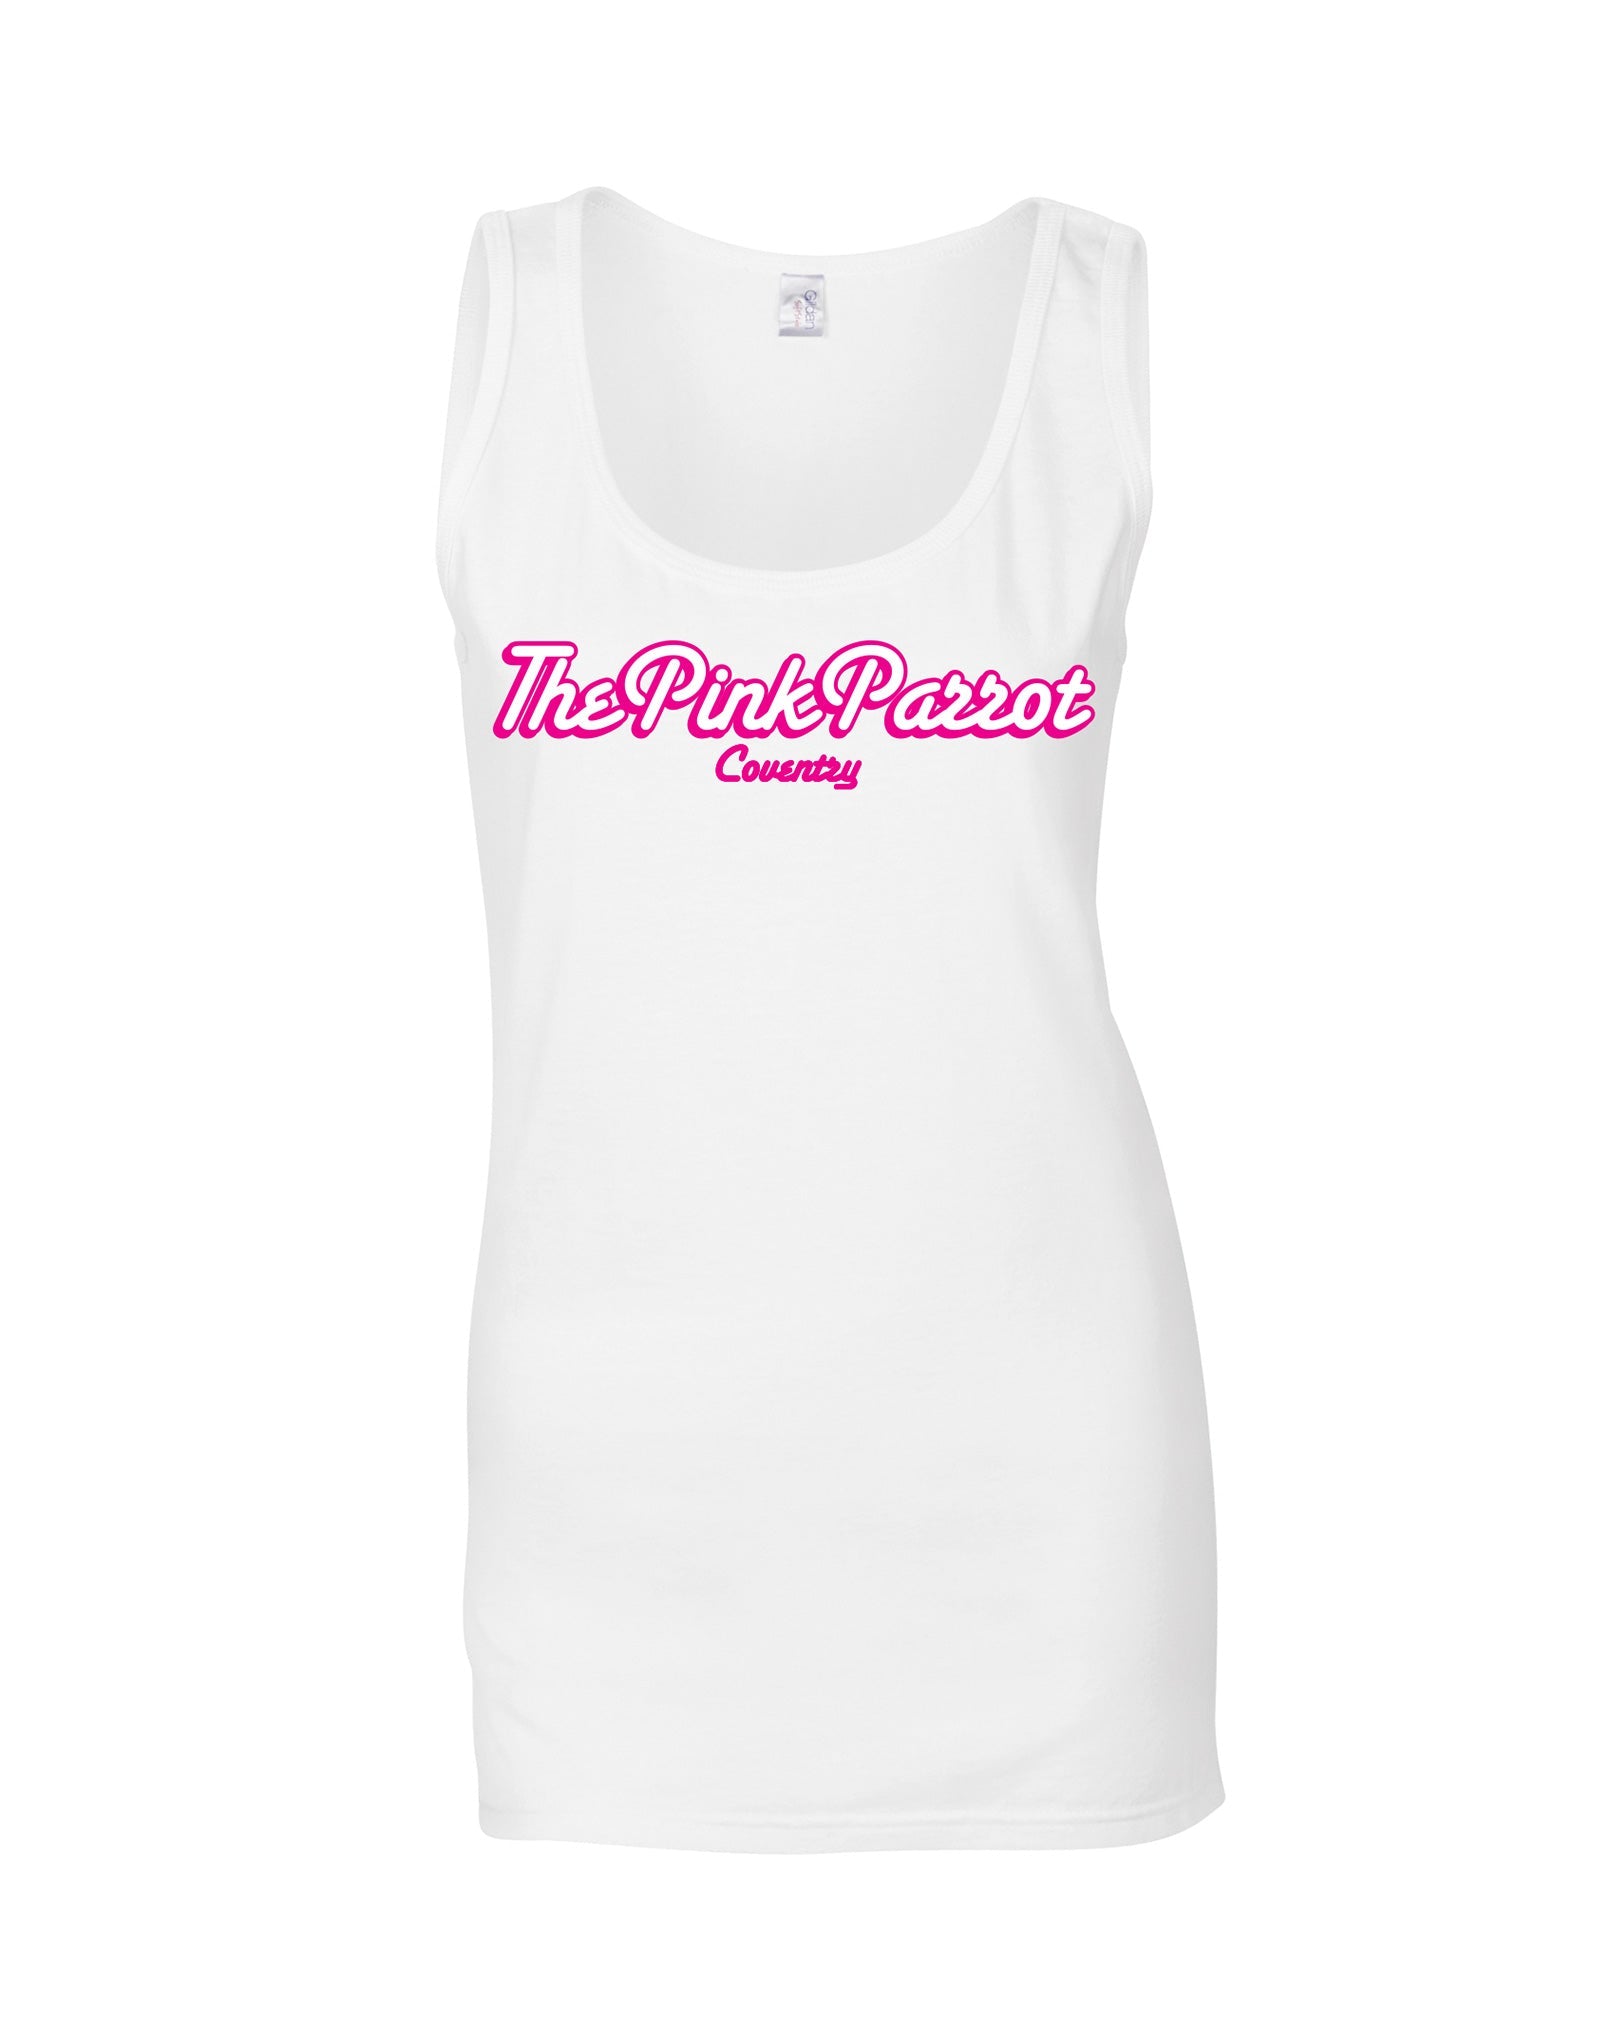 The Pink Parrot ladies fit vest - various colours - Dirty Stop Outs